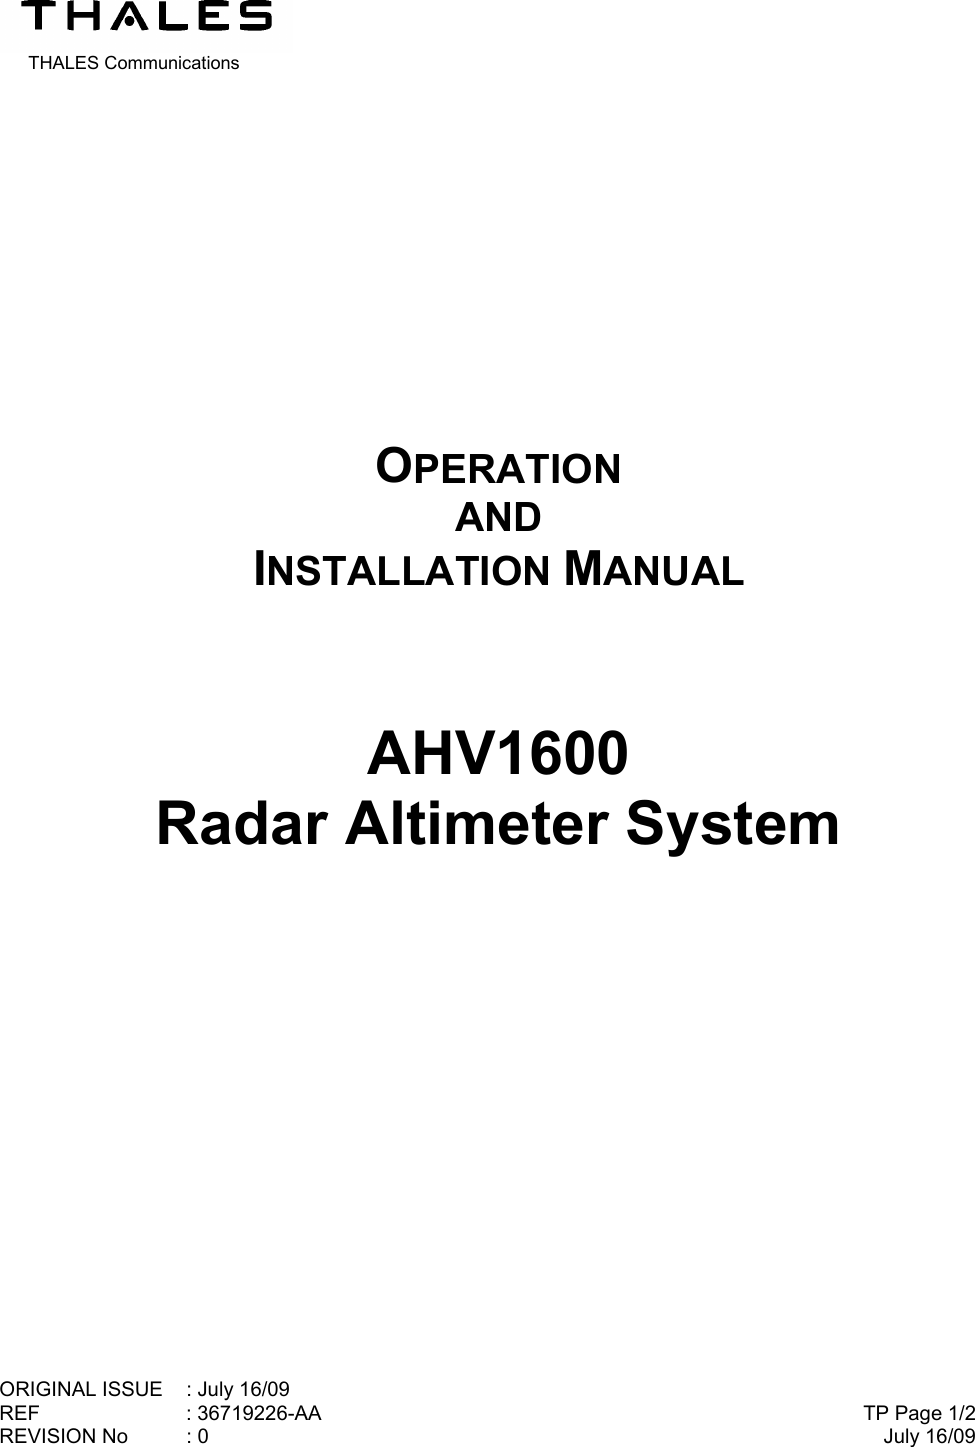  THALES Communications ORIGINAL ISSUE  : July 16/09 REF : 36719226-AA REVISION No  : 0    TP Page 1/2July 16/09             OPERATION AND INSTALLATION MANUAL    AHV1600 Radar Altimeter System         